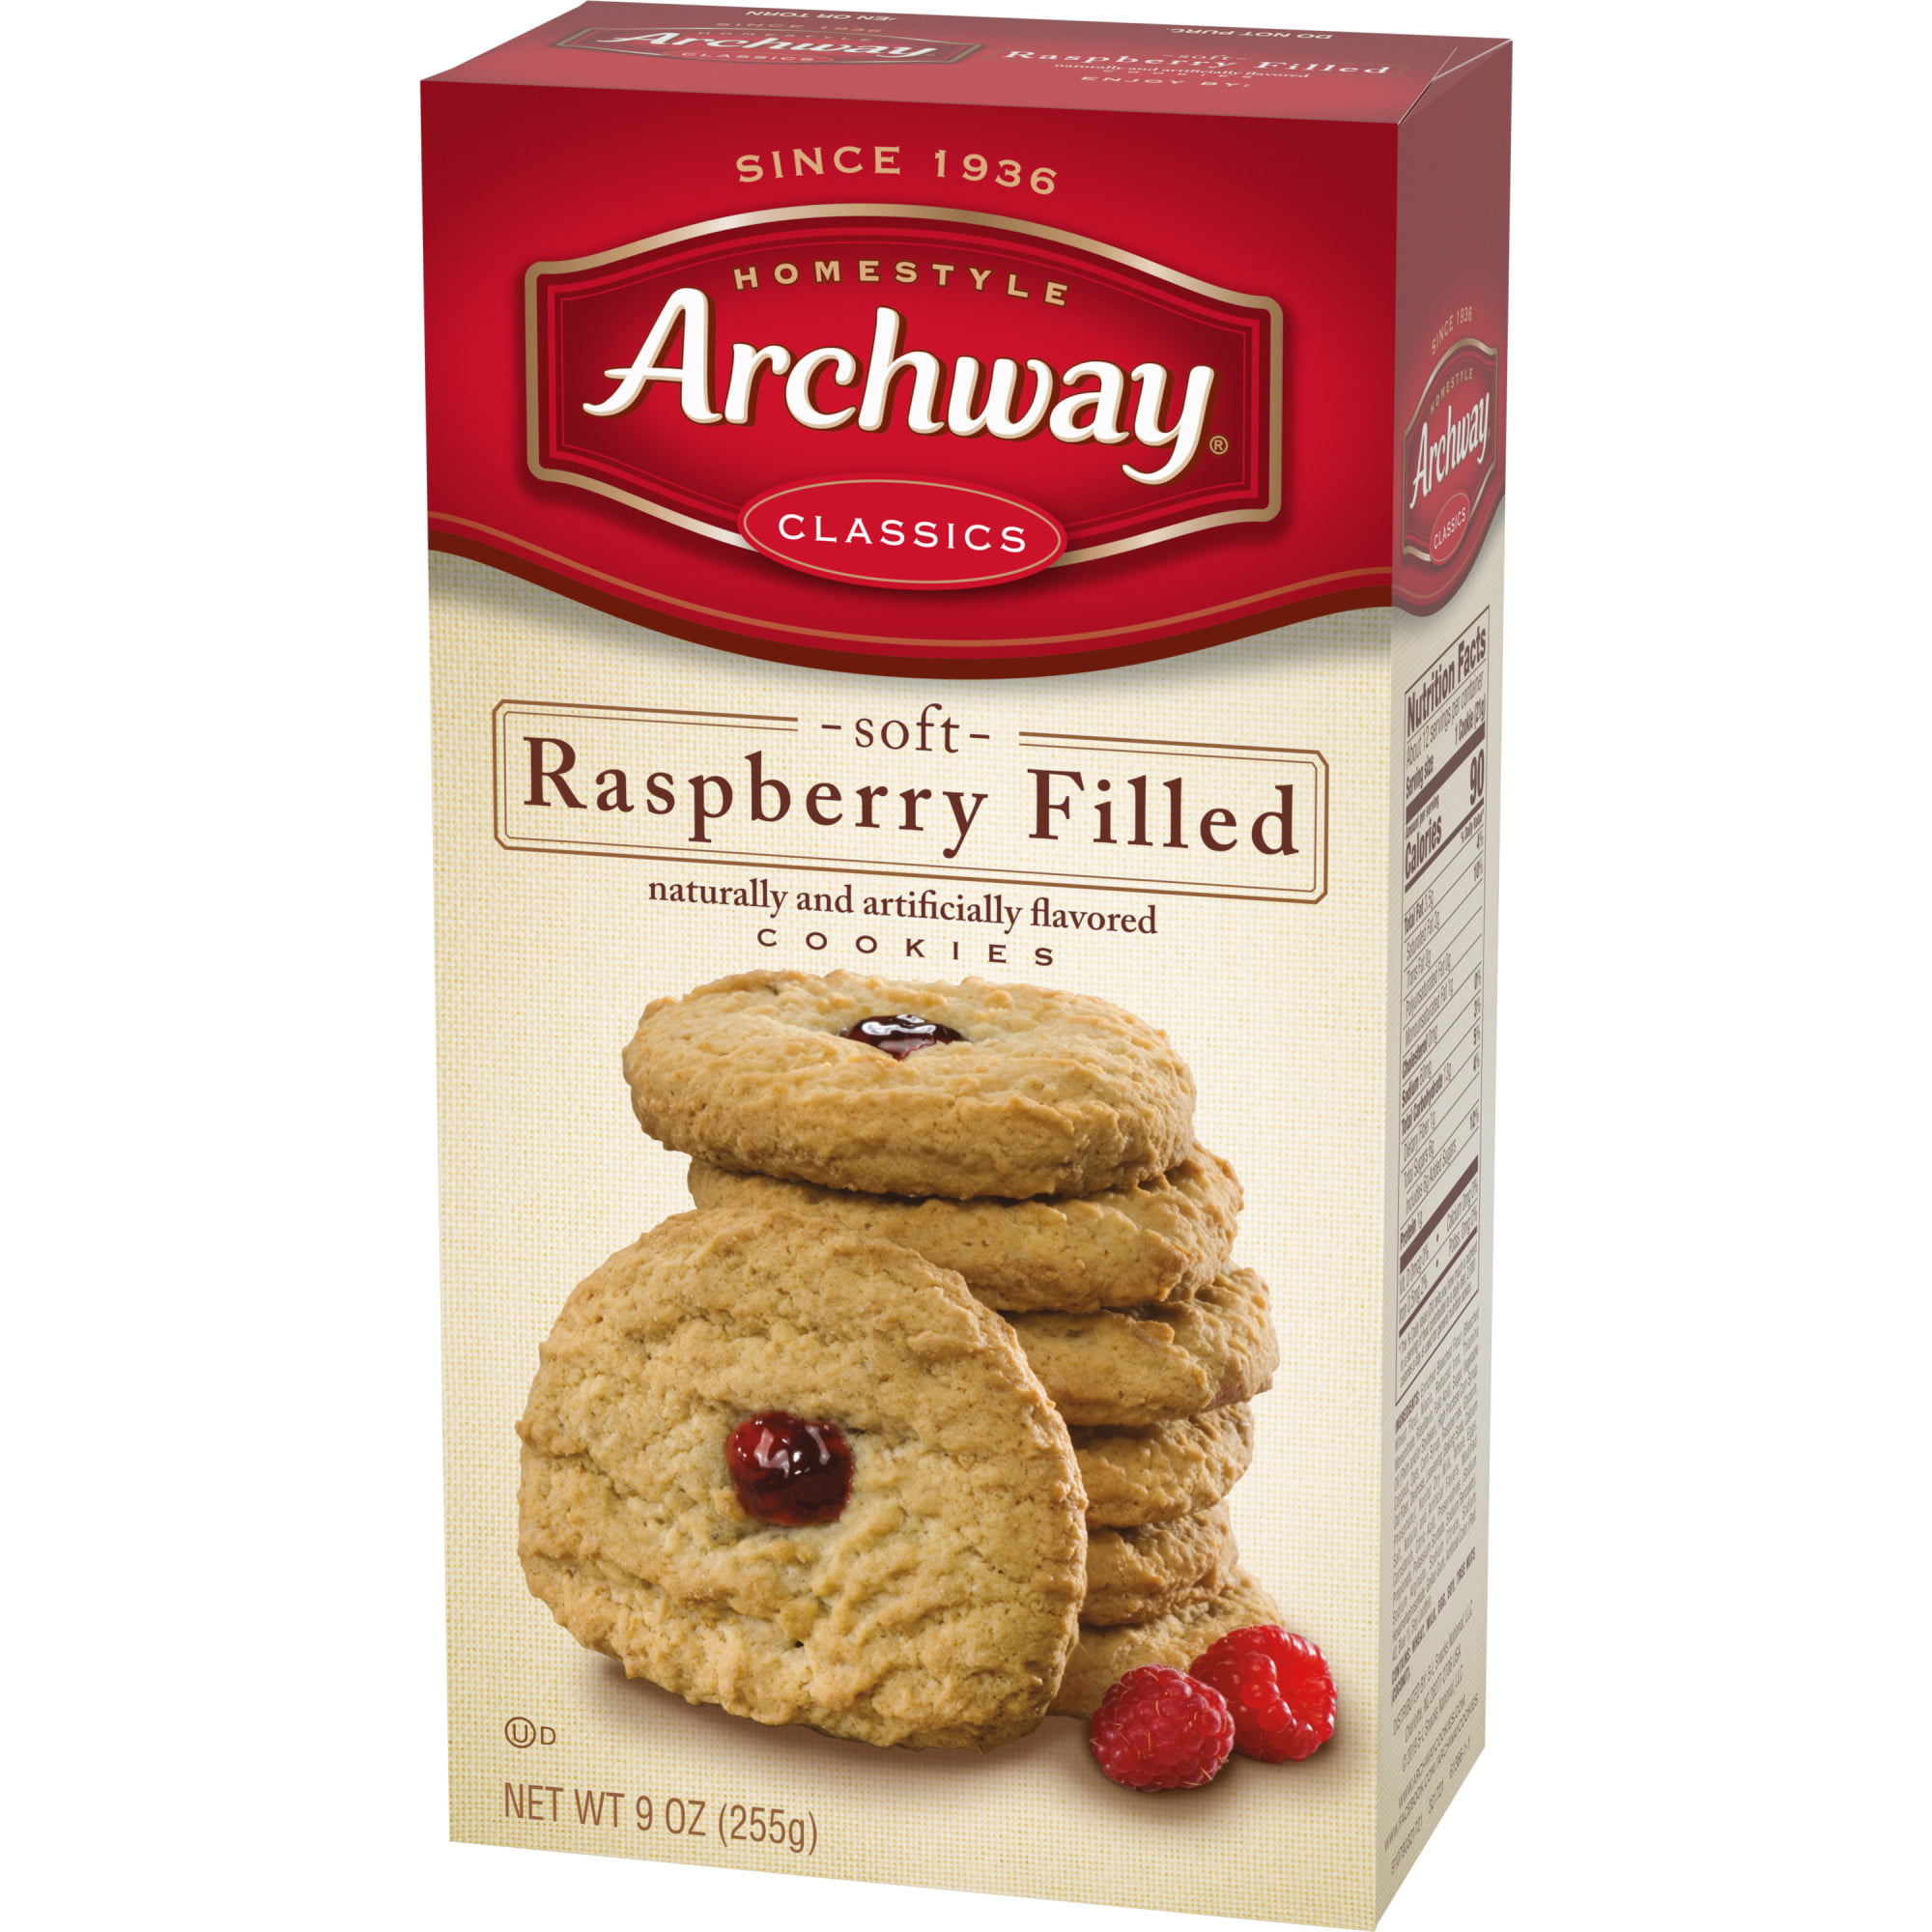 Discontinued 1980's discontinued archway cookies.